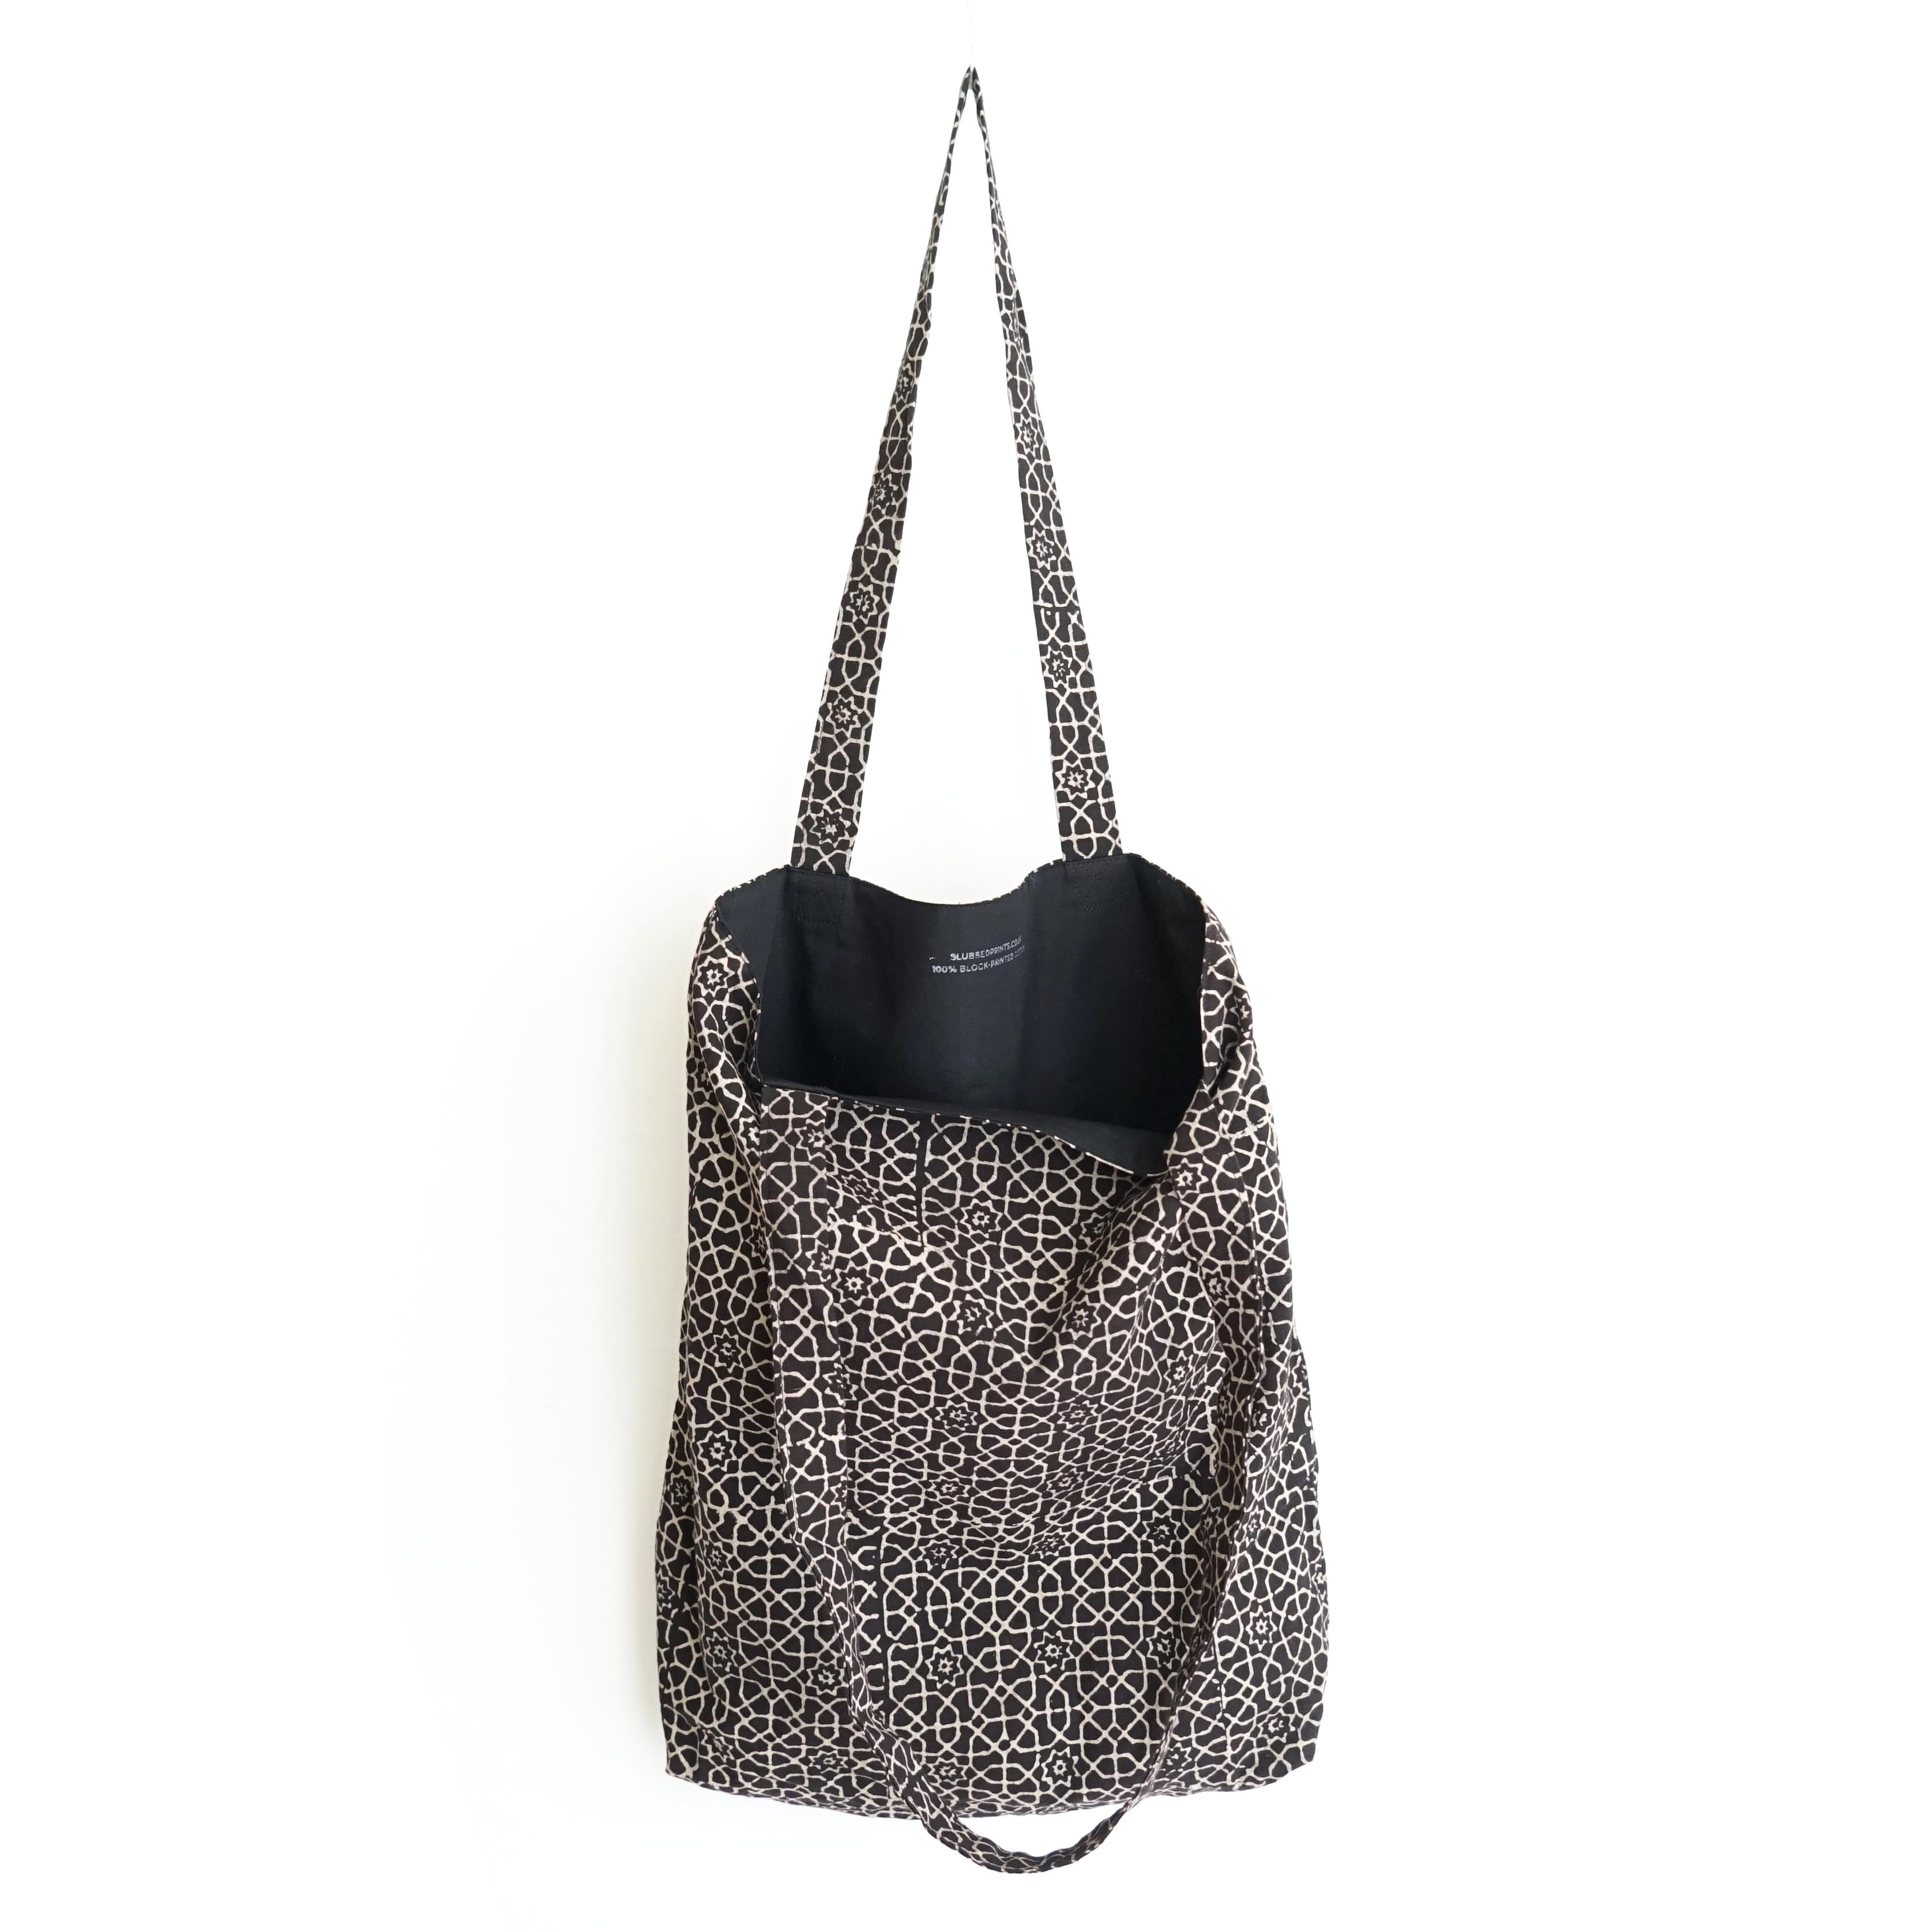 block printed cotton tote bag, natural dye, black, beige octagon design, lined with black cotton, open